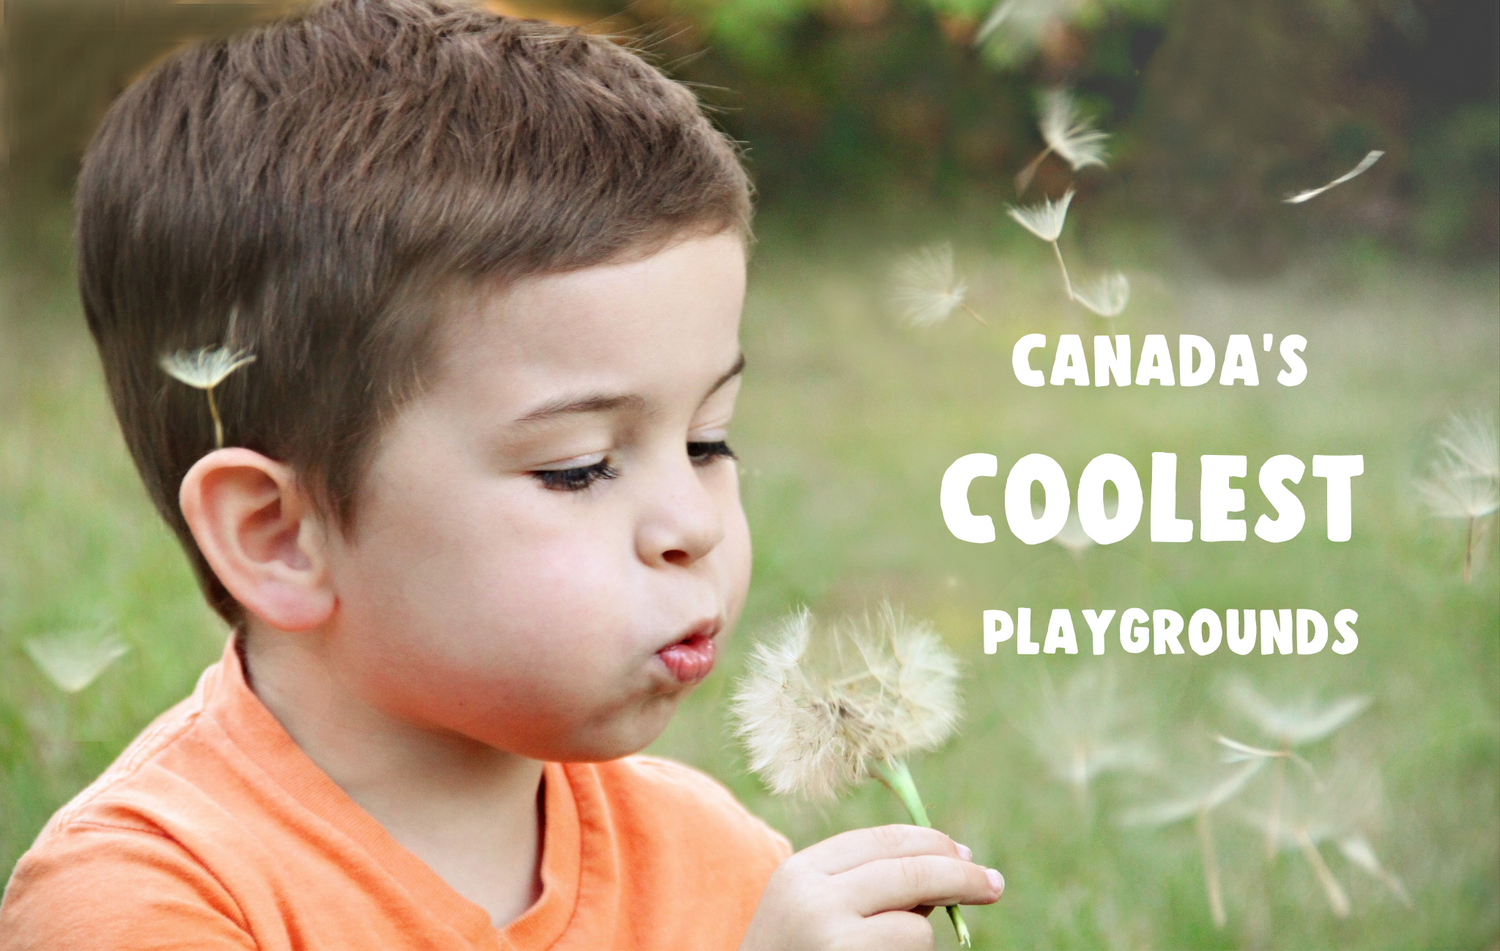 Canada's Coolest Playgrounds